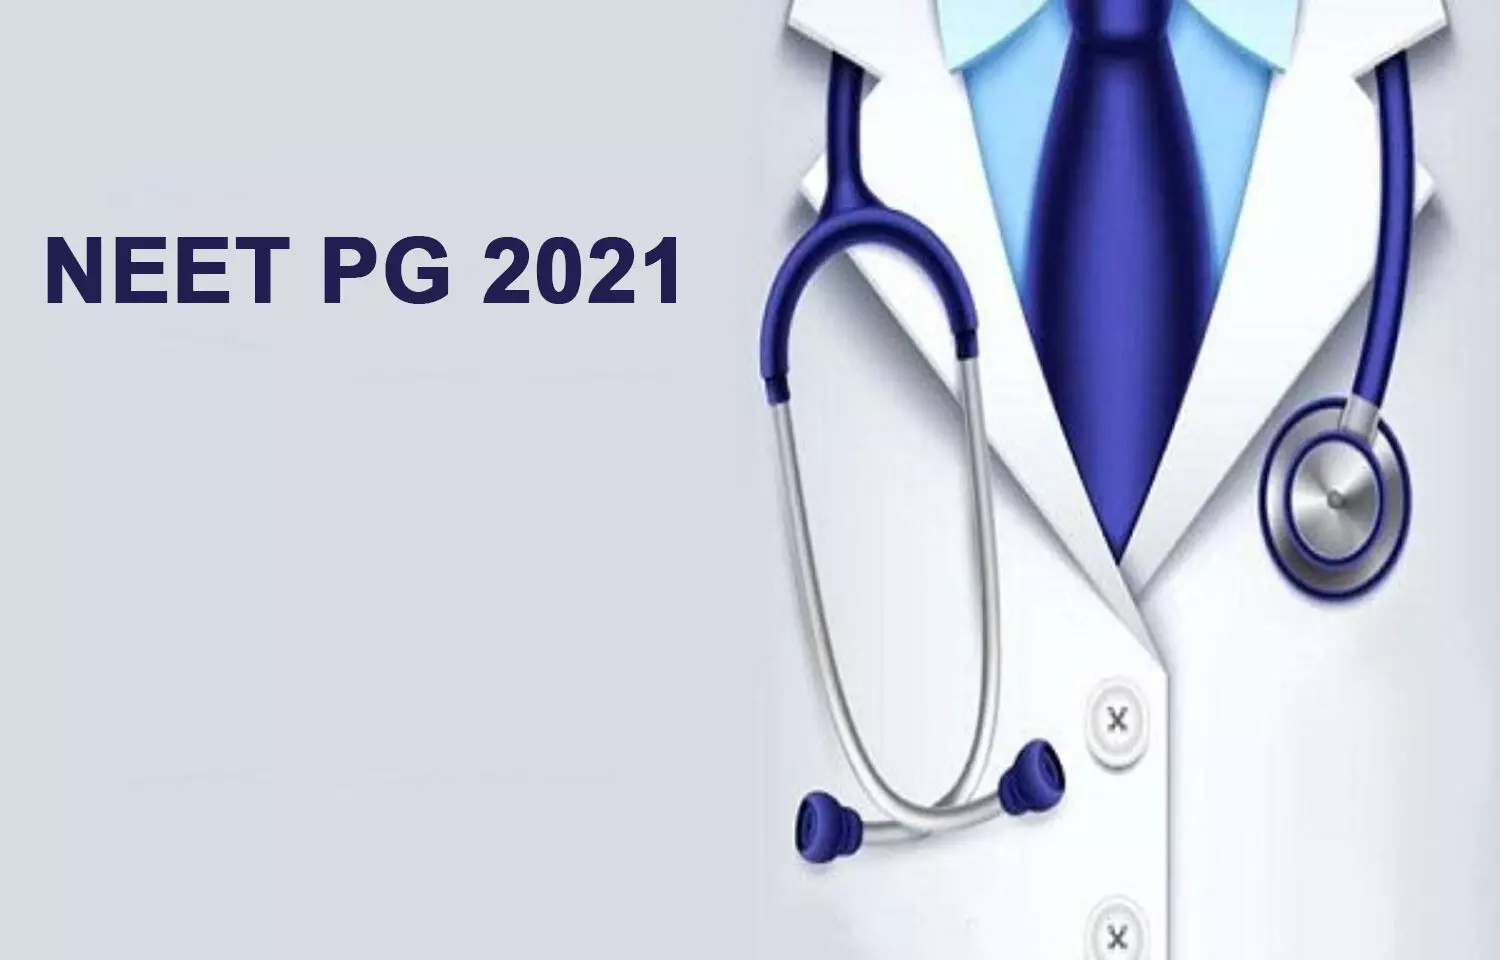 All About NEET PG 2021